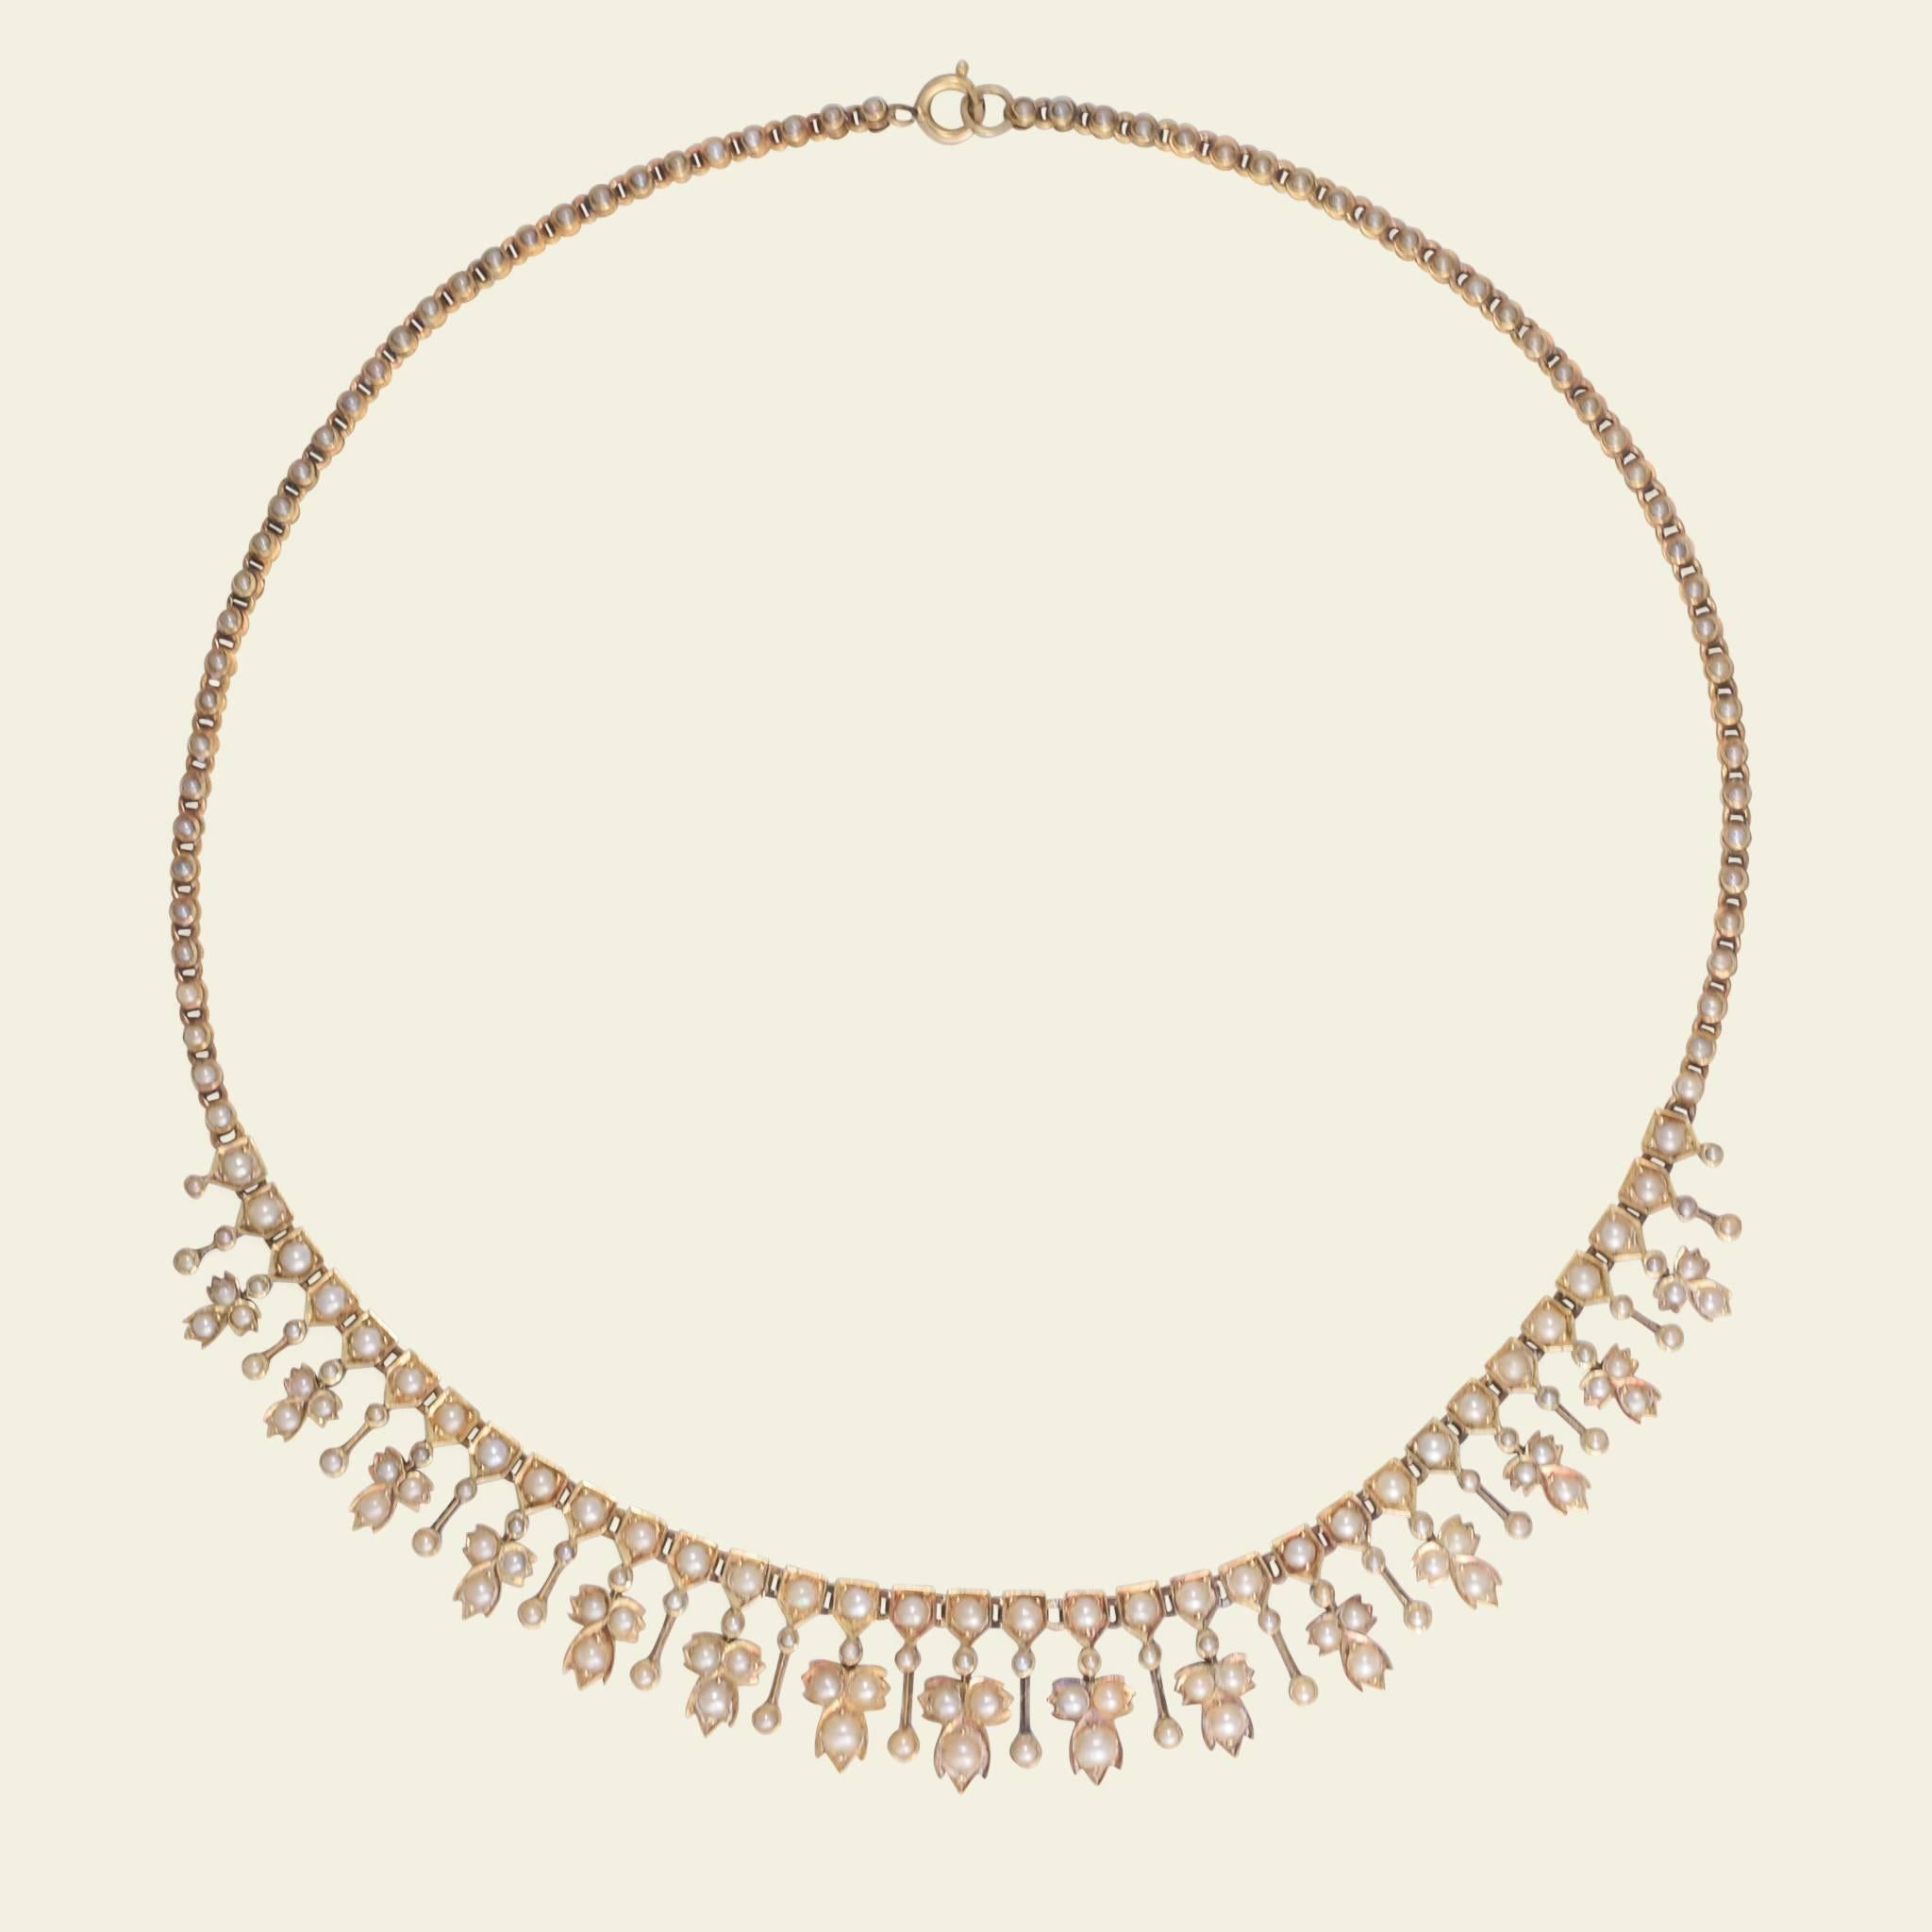 This mid Victorian fringe necklace is fashioned in 18k gold and almost glows with the rich luster of seed pearls. The drops that form the fringe alternate between simple pearl-studded bars and more elaborate floral-themed trefoil elements. Even the